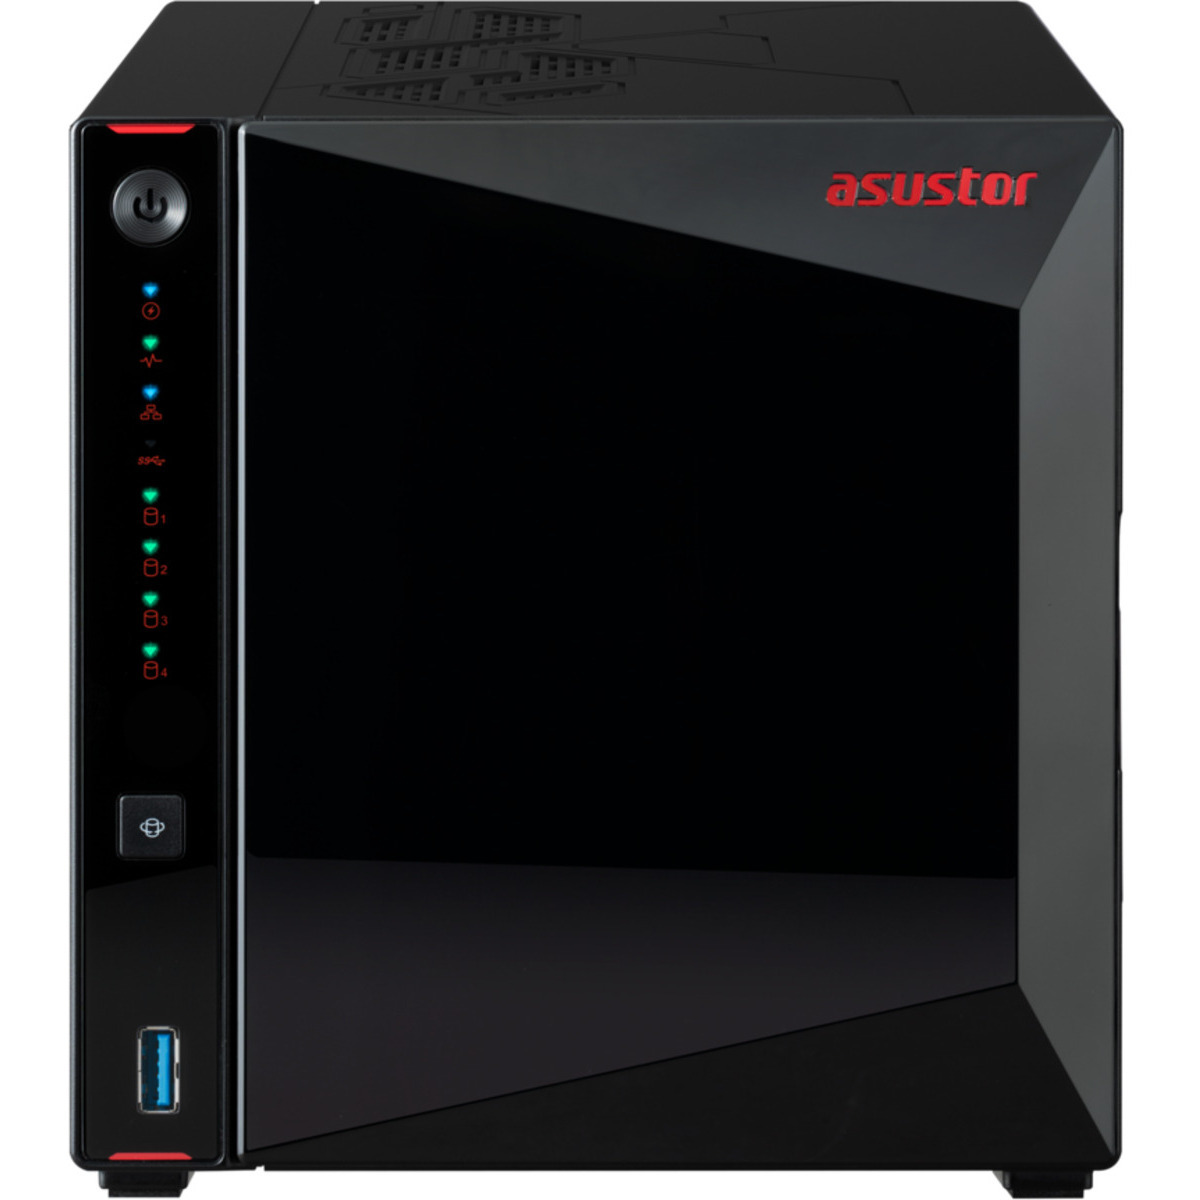 ASUSTOR Nimbustor 4 Gen2 AS5404T 8tb 4-Bay Desktop Multimedia / Power User / Business NAS - Network Attached Storage Device 4x2tb Samsung 870 QVO MZ-77Q2T0 2.5 560/530MB/s SATA 6Gb/s SSD CONSUMER Class Drives Installed - Burn-In Tested - FREE RAM UPGRADE Nimbustor 4 Gen2 AS5404T